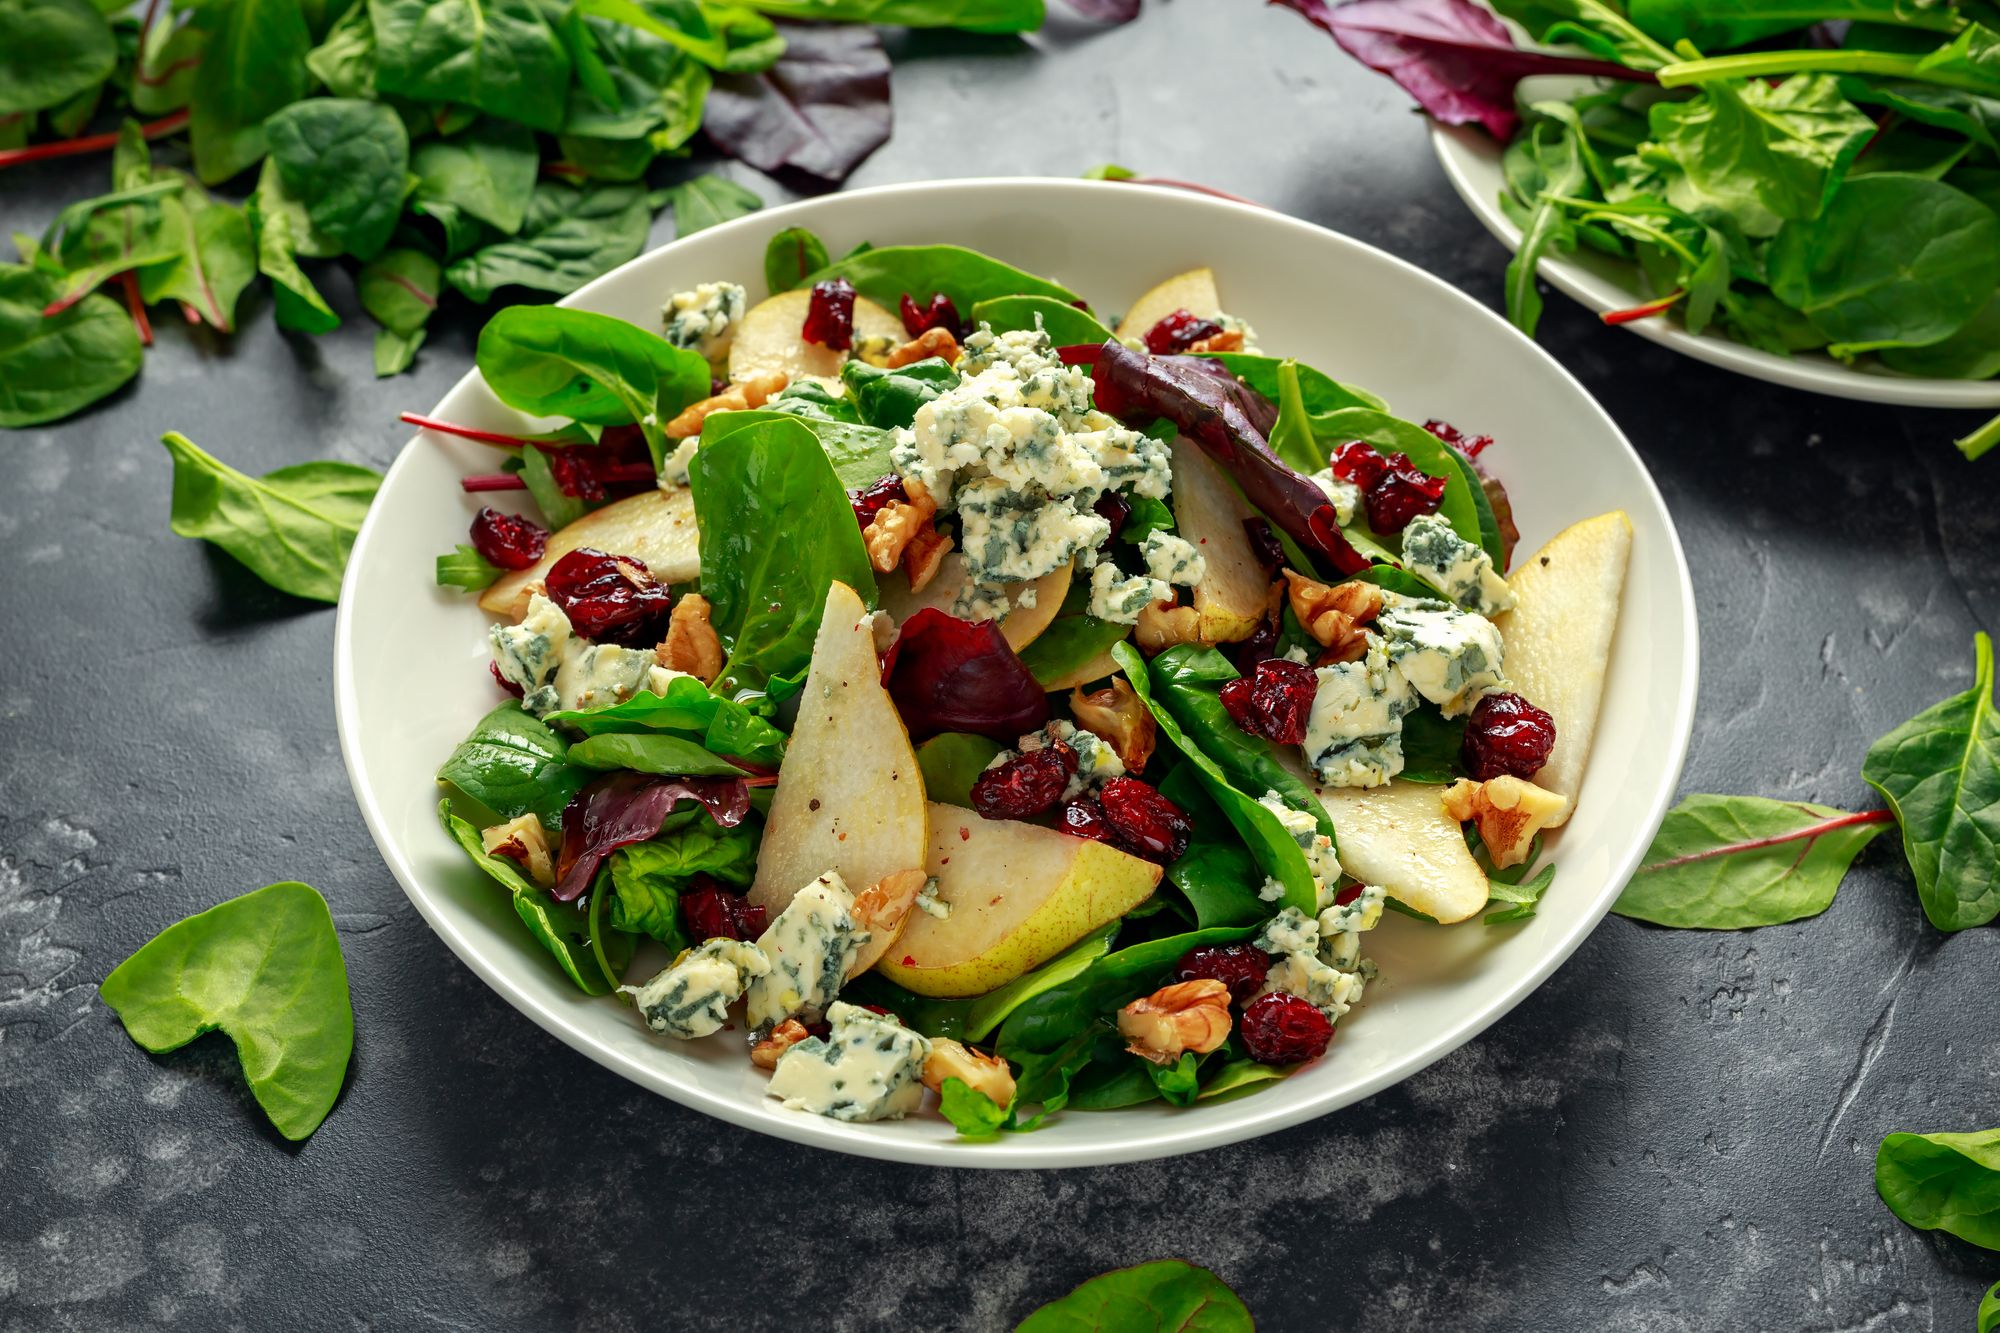 Pear and Goat’s Cheese Salad